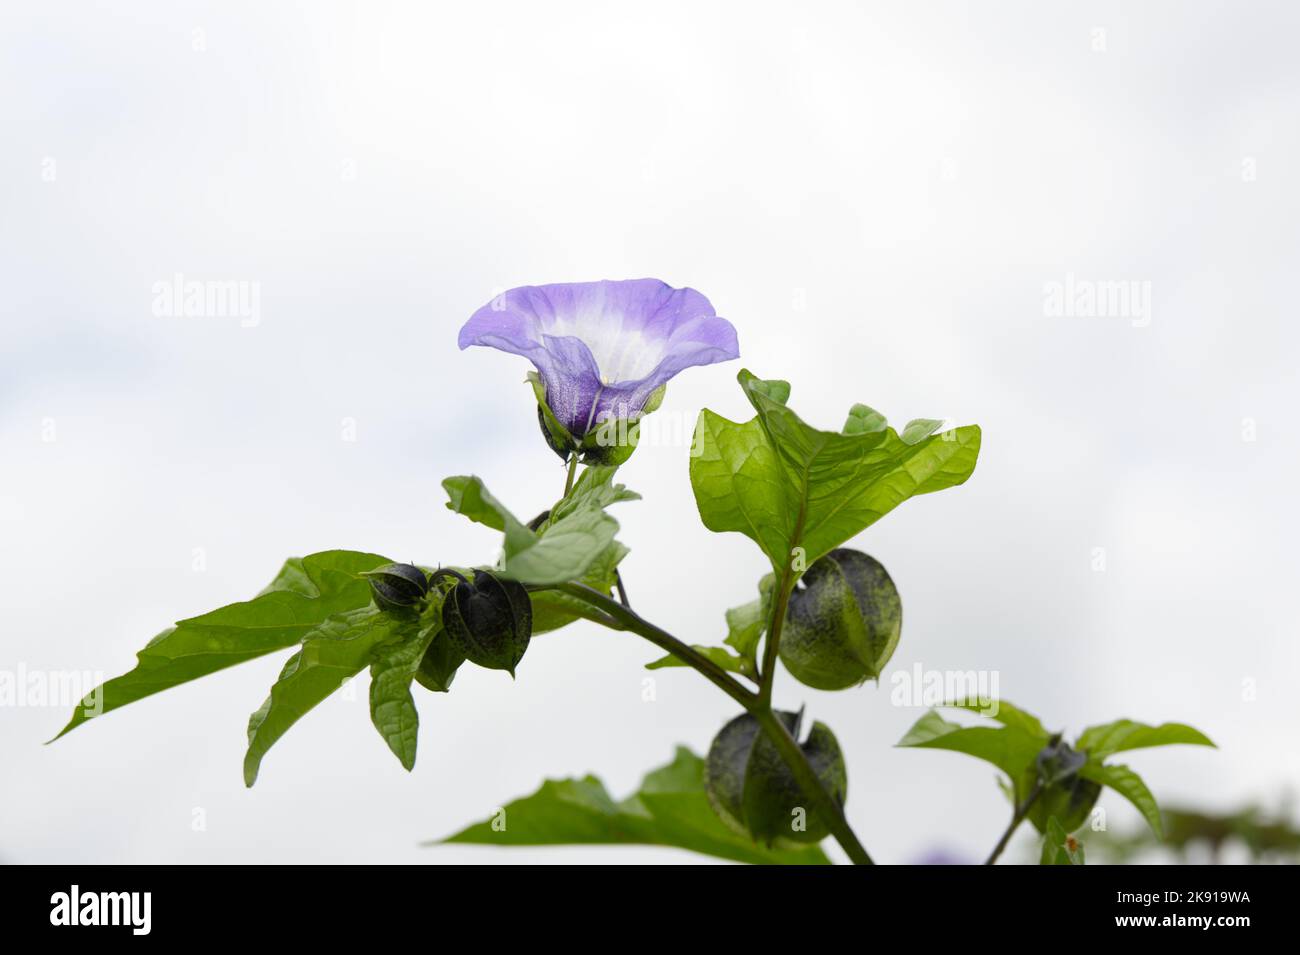 Blue, summer flowered annual Nicandra Physalodes, Shoo Fly plant, Apple of Peru flower UKgarden  July Stock Photo